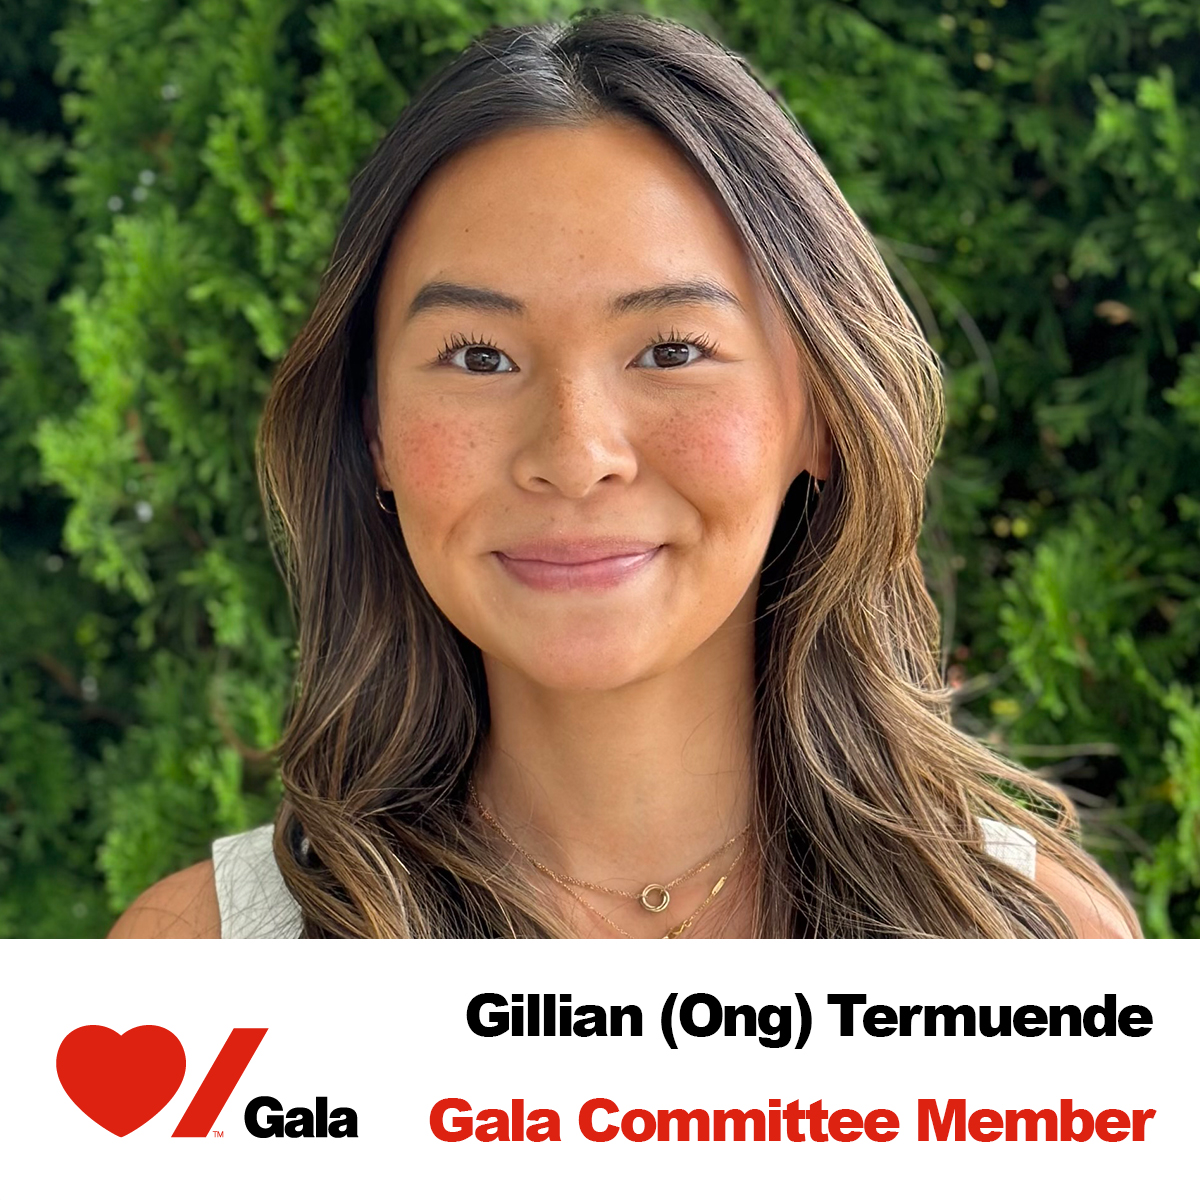 Welcome Gillian (Ong) Termuende to the #HSFGala Committee this year! She is personally connected to the theme of women’s heart and brain health and is committed to help raise crucial funds and awareness for @heartandstroke to tackle #healthinequities. 💔
#heartandstrokebeatasone